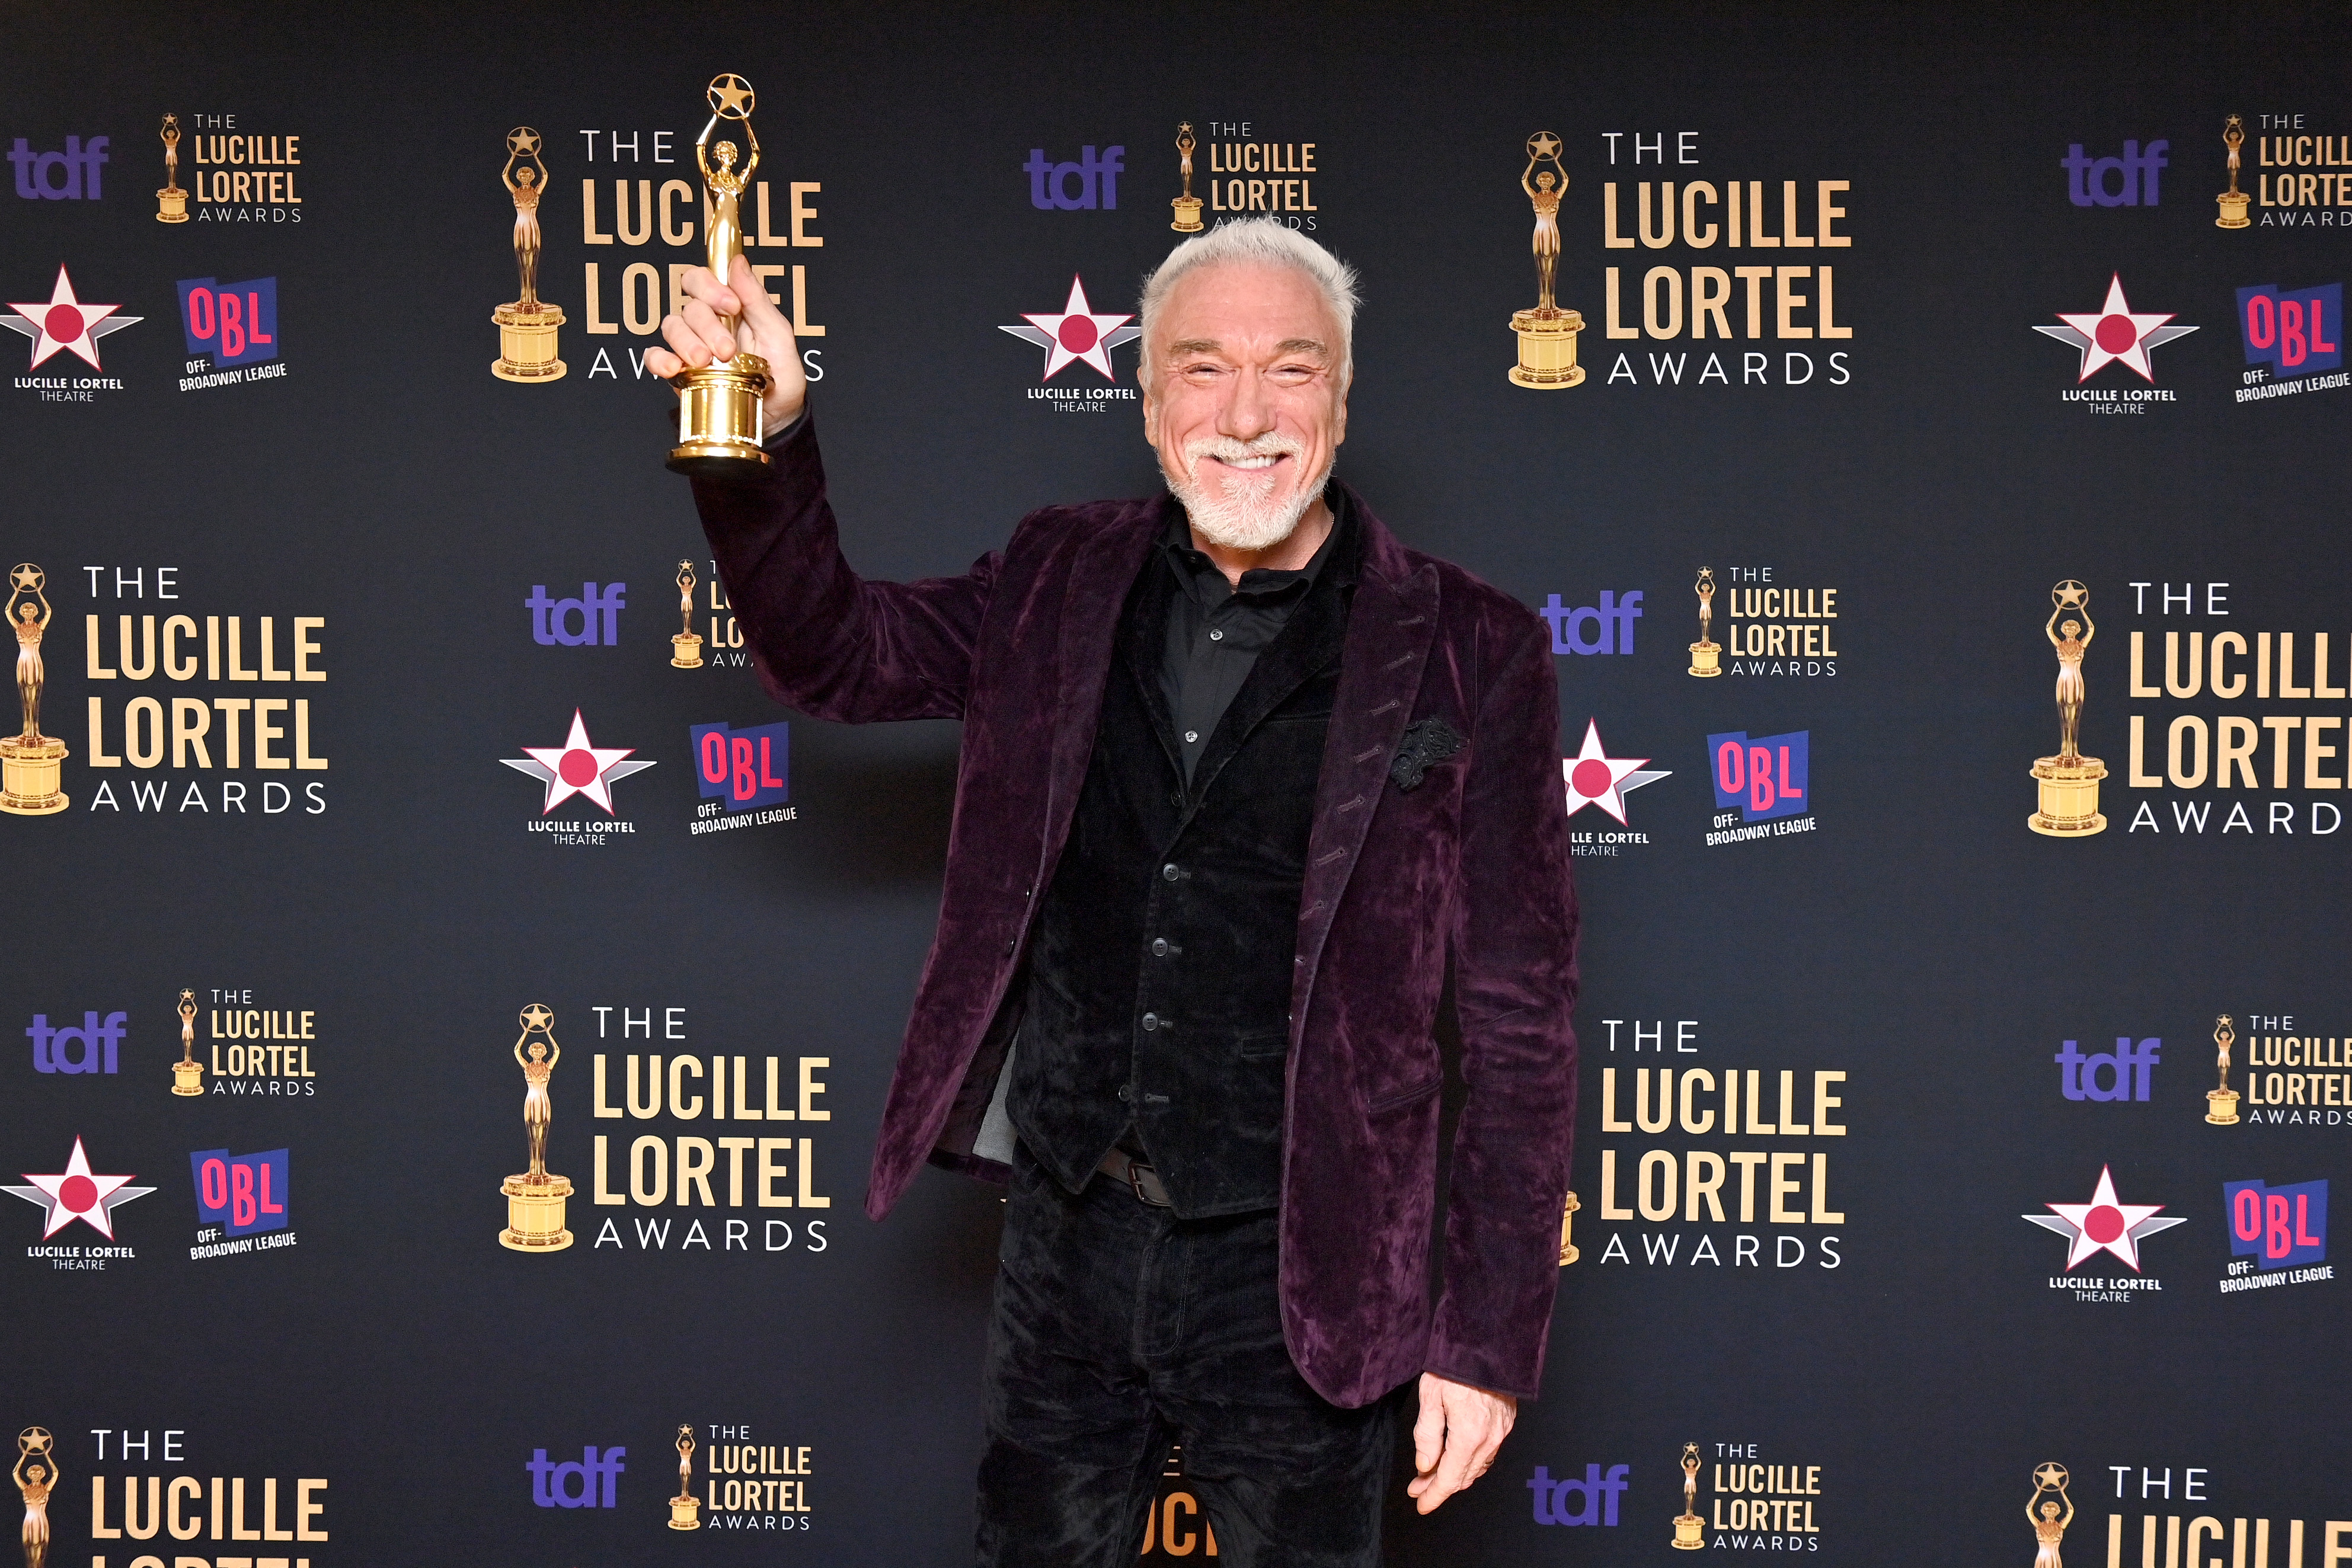 39th Annual Lucille Lortel Awards